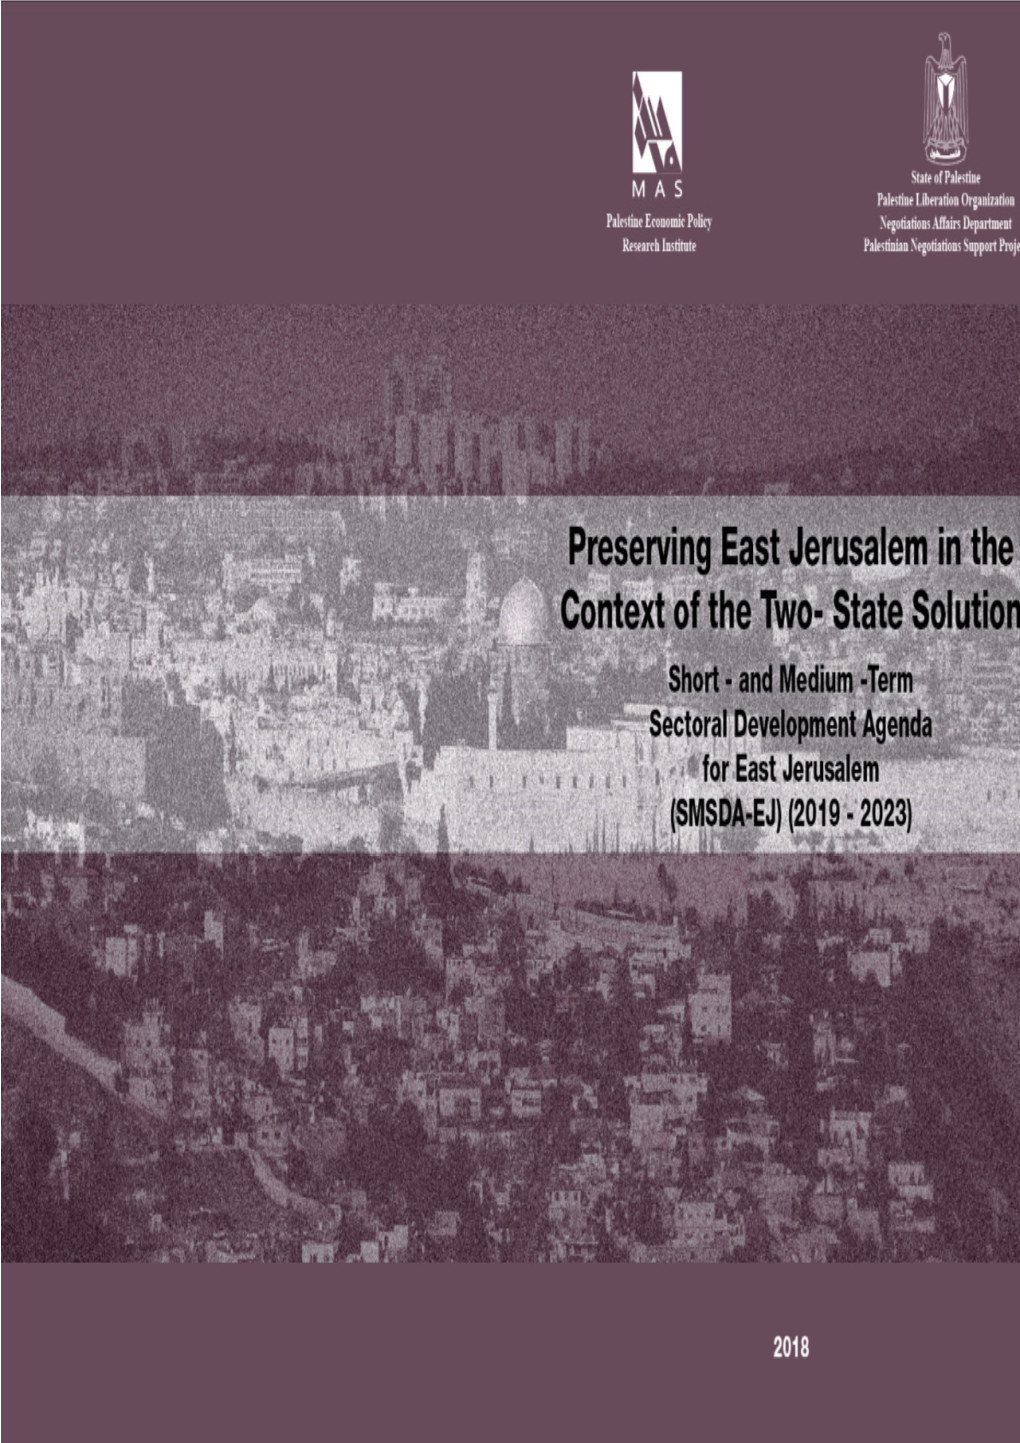 Preserving East Jerusalem in the Context of the Two- State Solution Short- and Medium-Term Sectoral Development Agenda for East Jerusalem (SMSDA-EJ) (2019-2023)